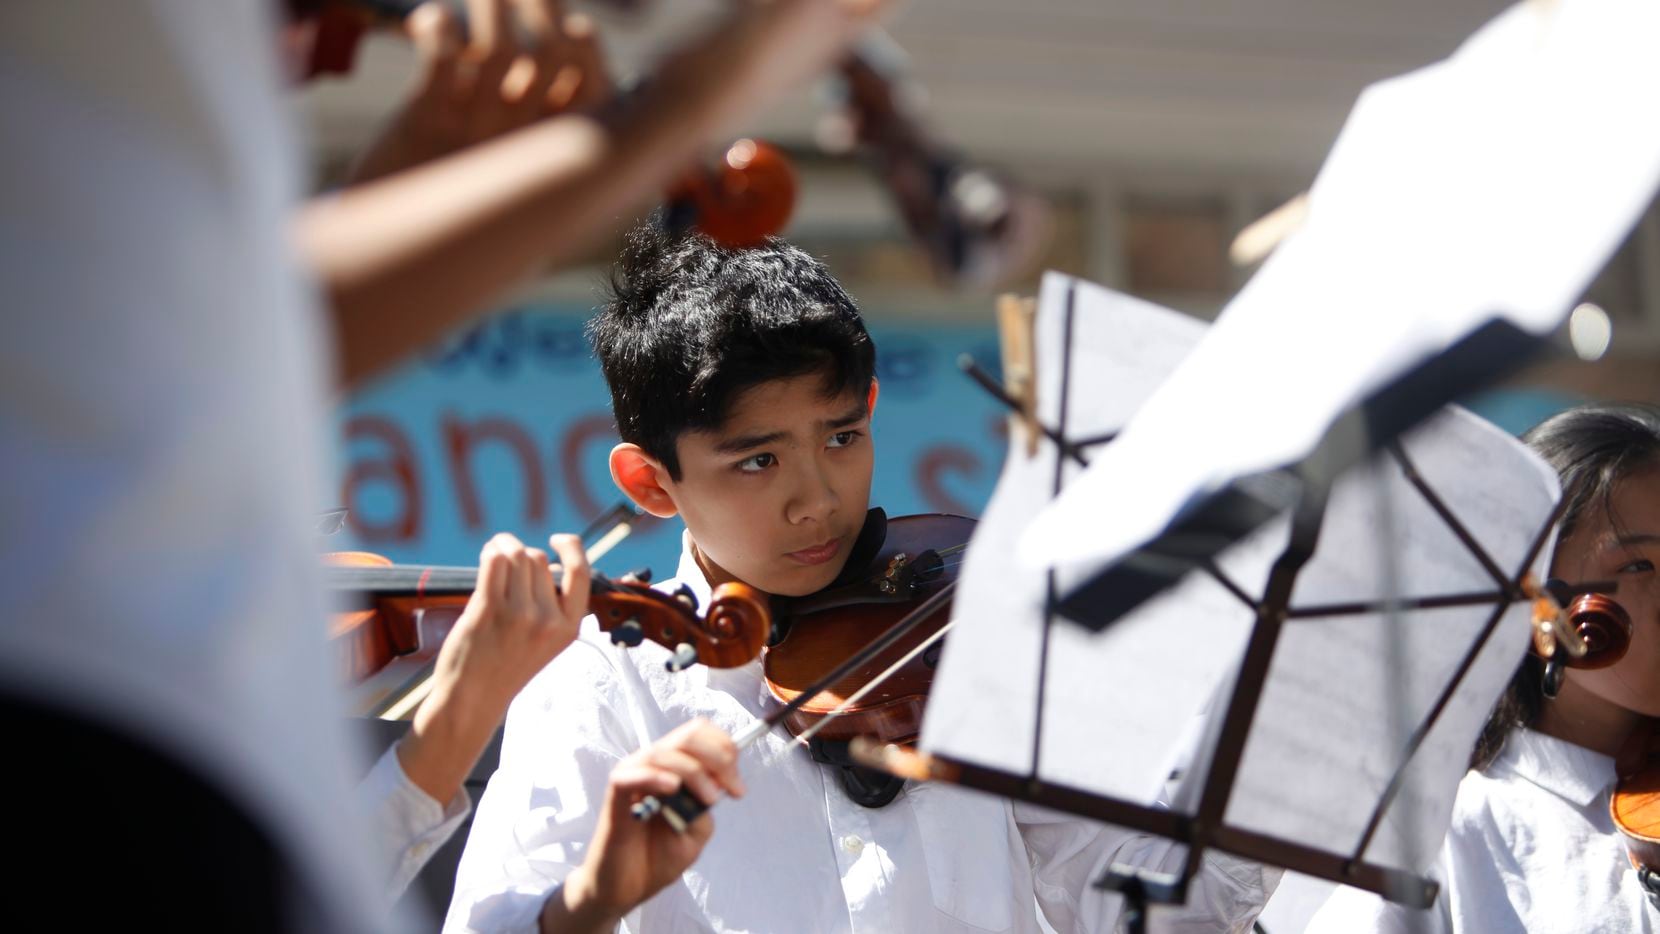 The Lone Star Youth Orchestra is hosting auditions this summer. Registration to audition is...